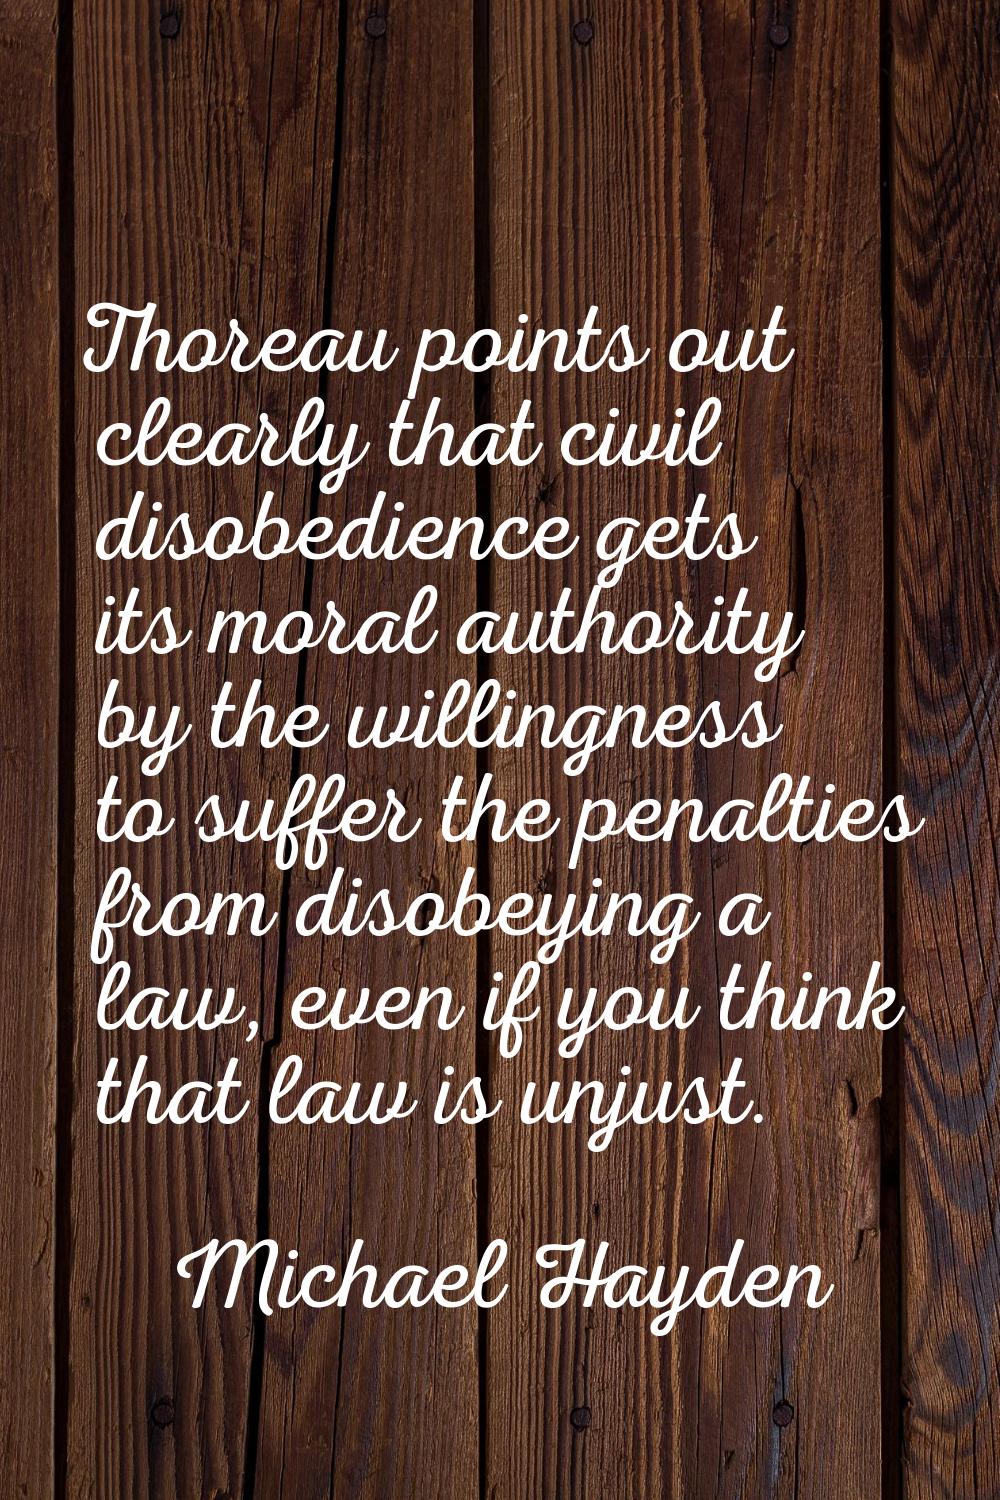 Thoreau points out clearly that civil disobedience gets its moral authority by the willingness to s